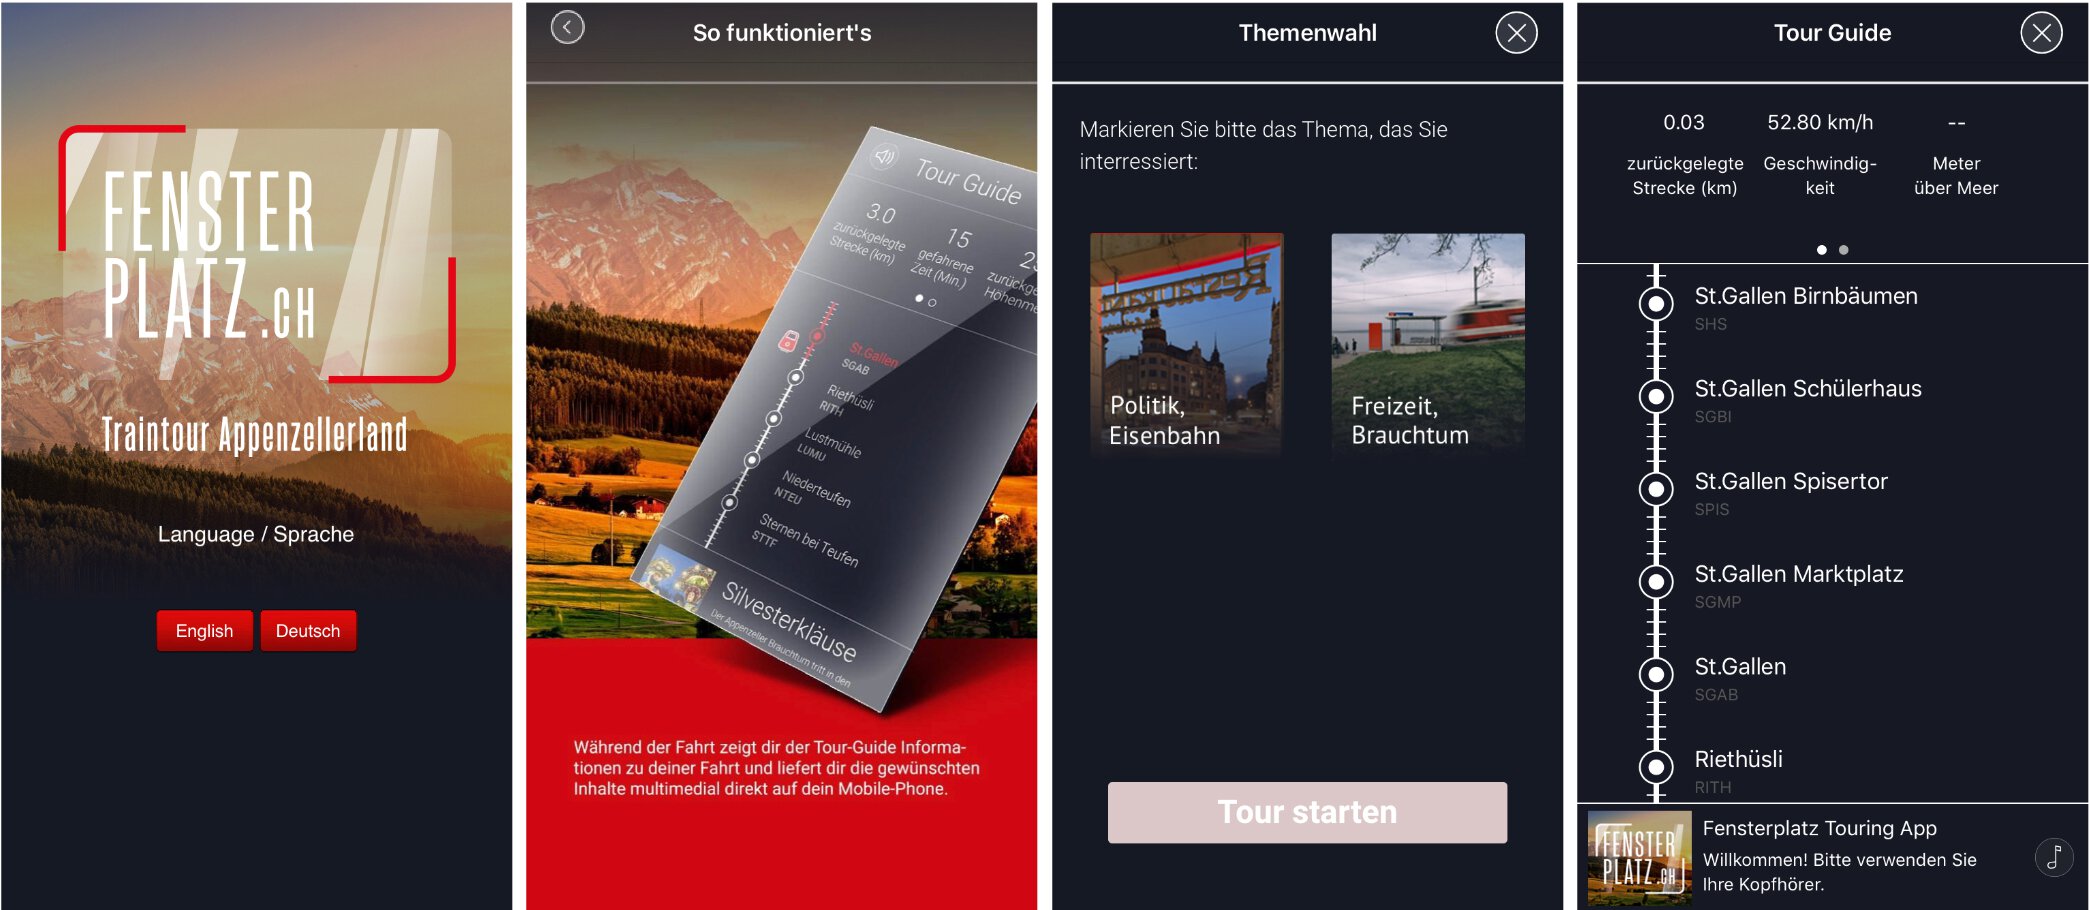 A moving listening experience - Digital travel guide for Swiss Railways